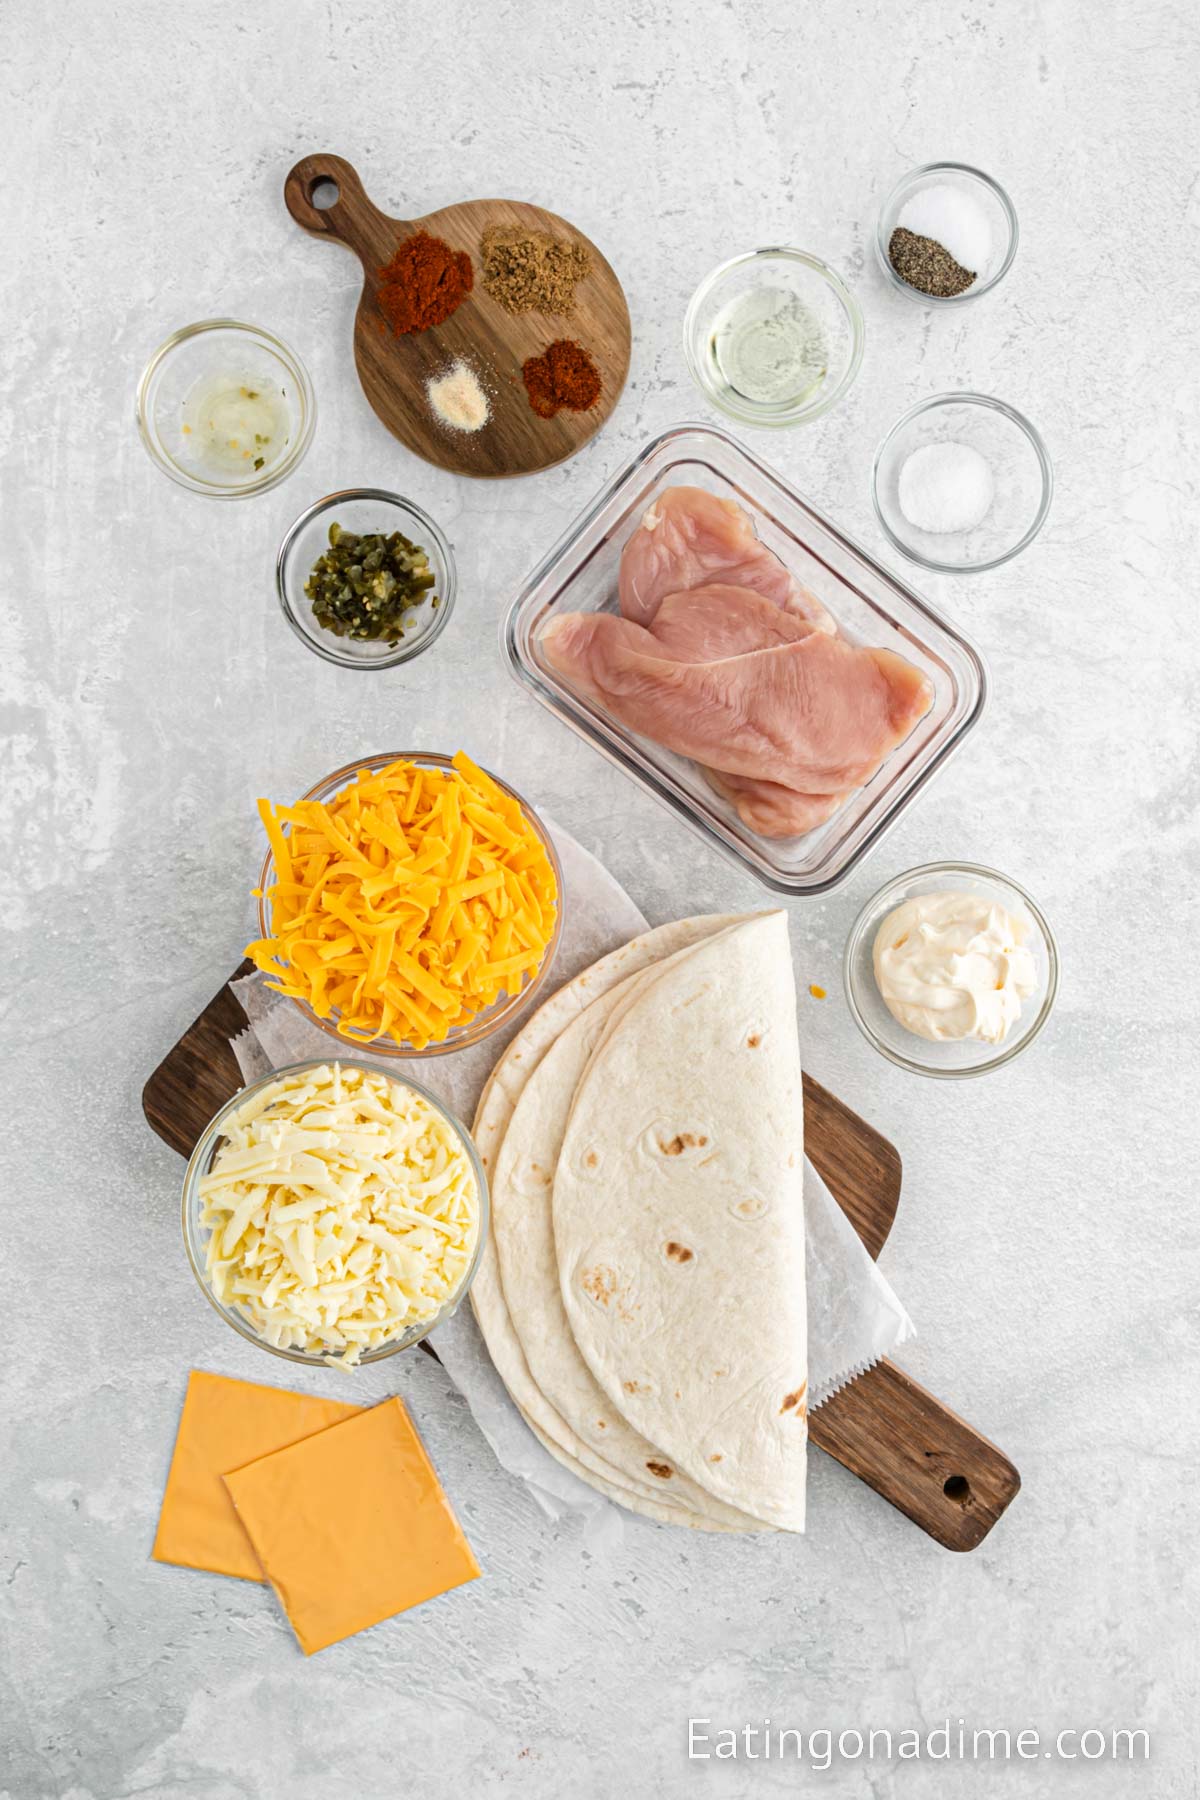 Ingredients needed for Taco Bell Chicken Quesadillas - Mayonnaise, pickled jalapenos, sugar, cumin, paprika, cayenne pepper, garlic powder, chicken, oil, salt and pepper, flour tortillas, cheese, 